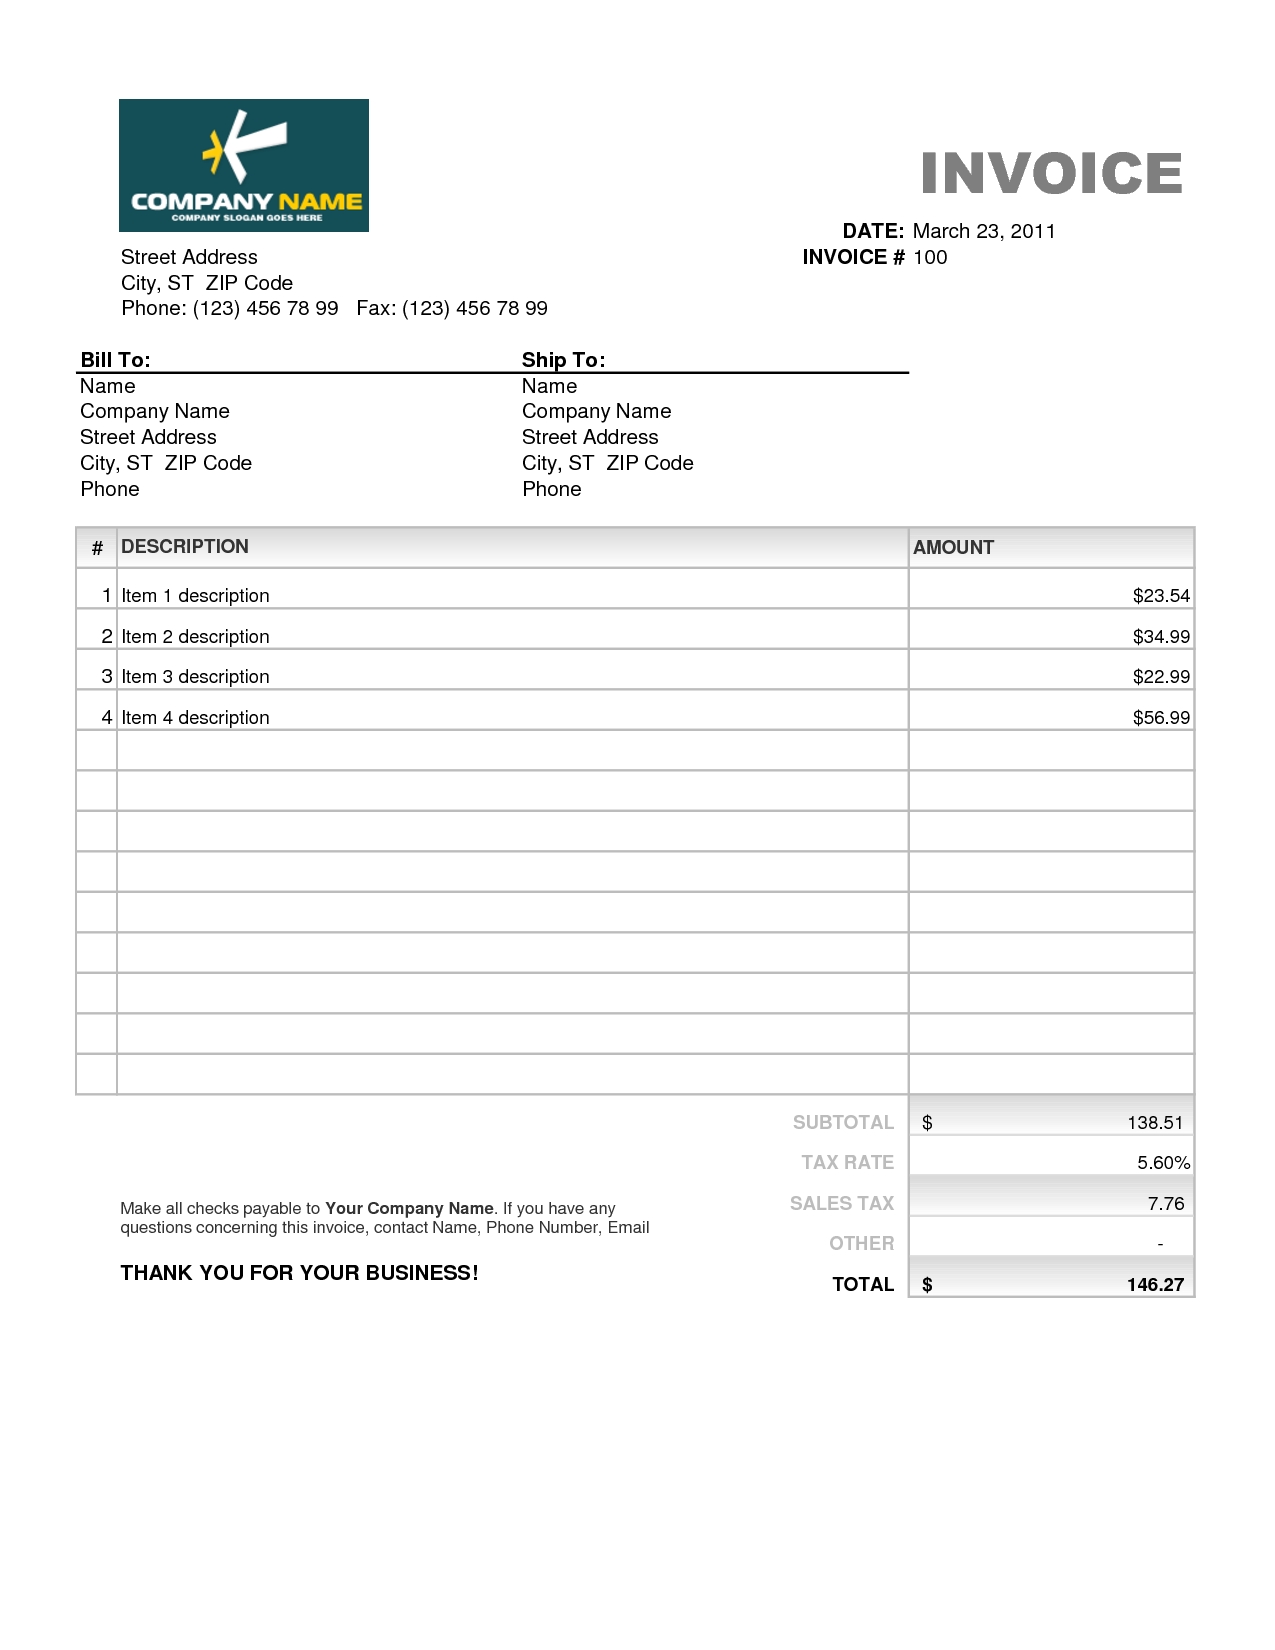 microsoft word invoice template free download pay stub samples invoice template excel download